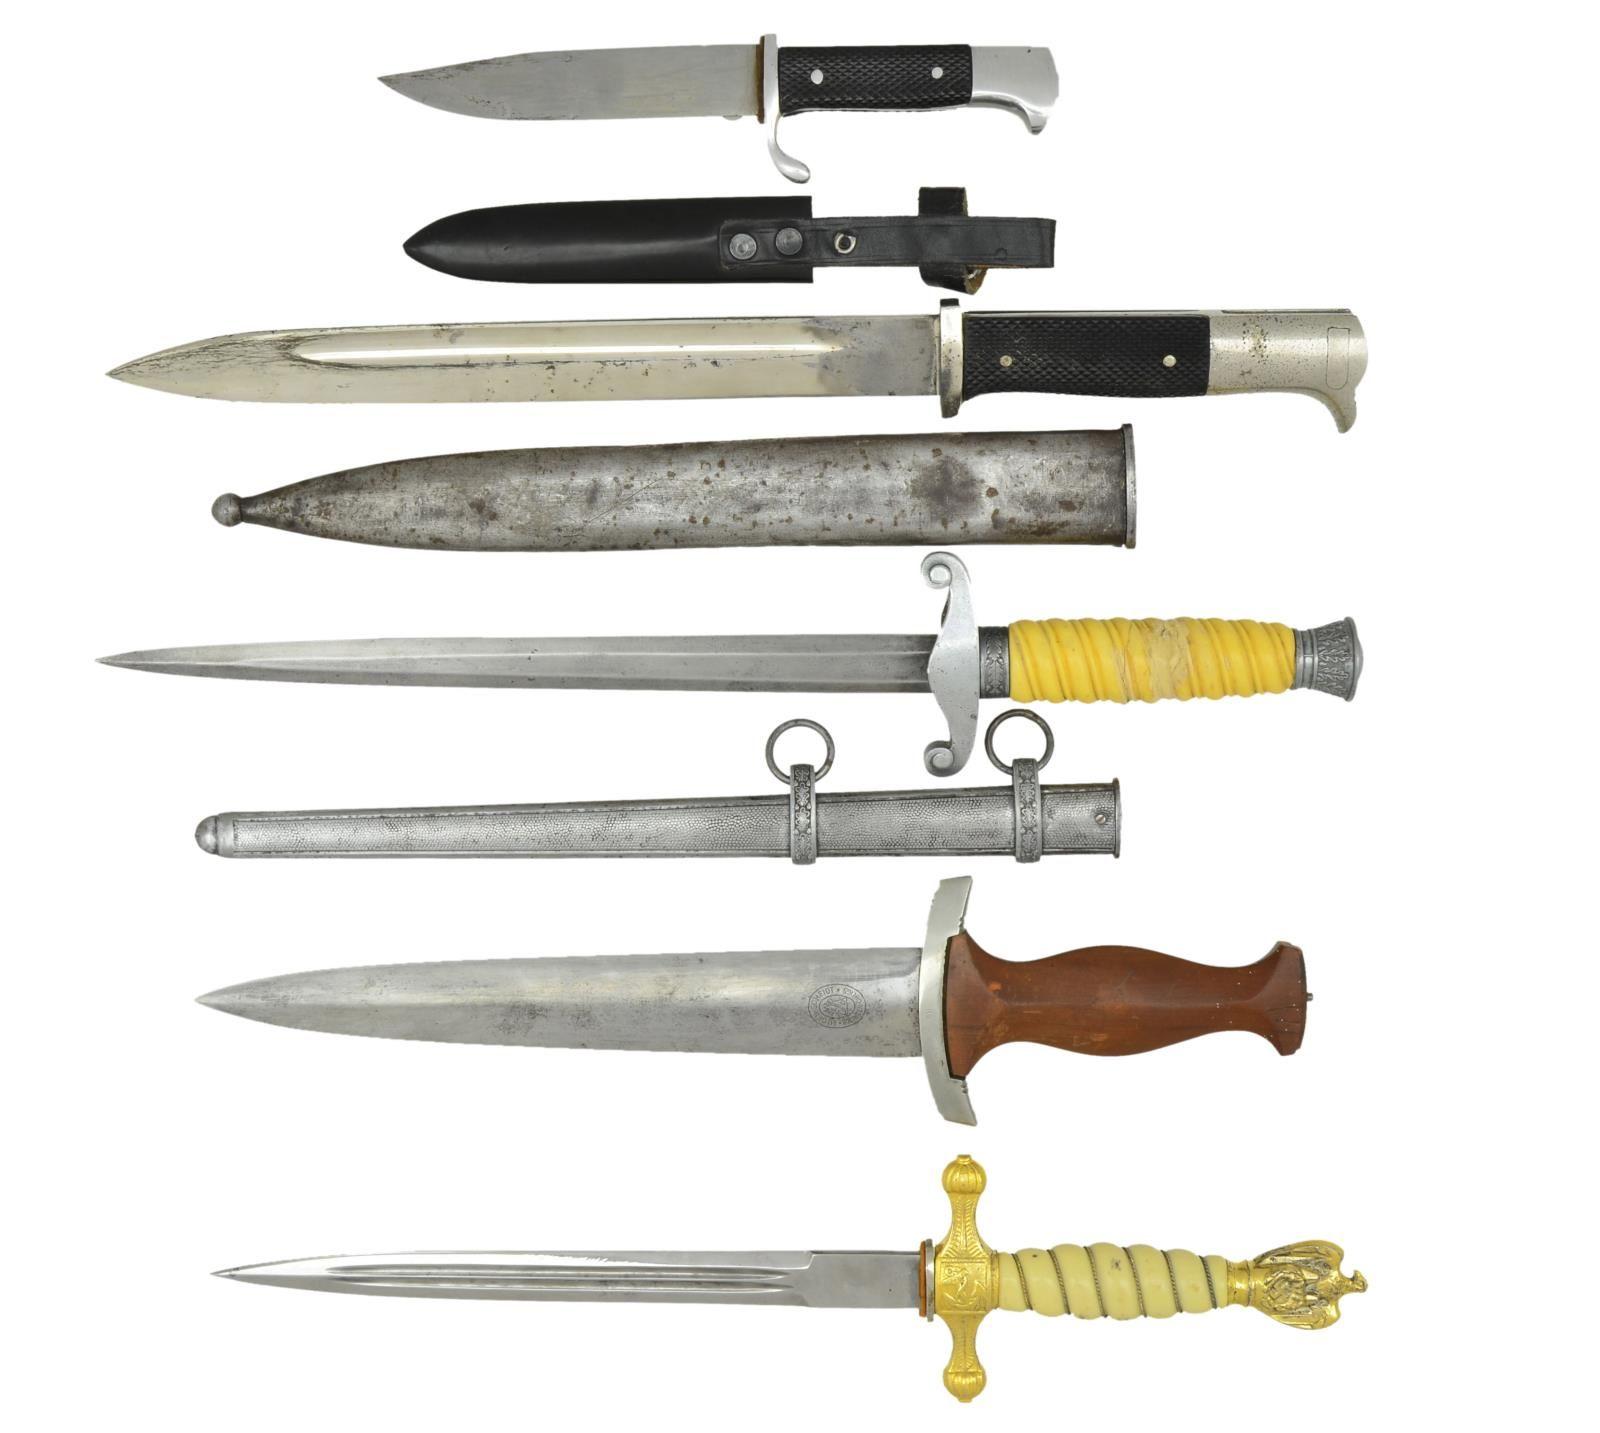 5 WWII & WWII STYLE GERMAN EDGED WEAPONS.